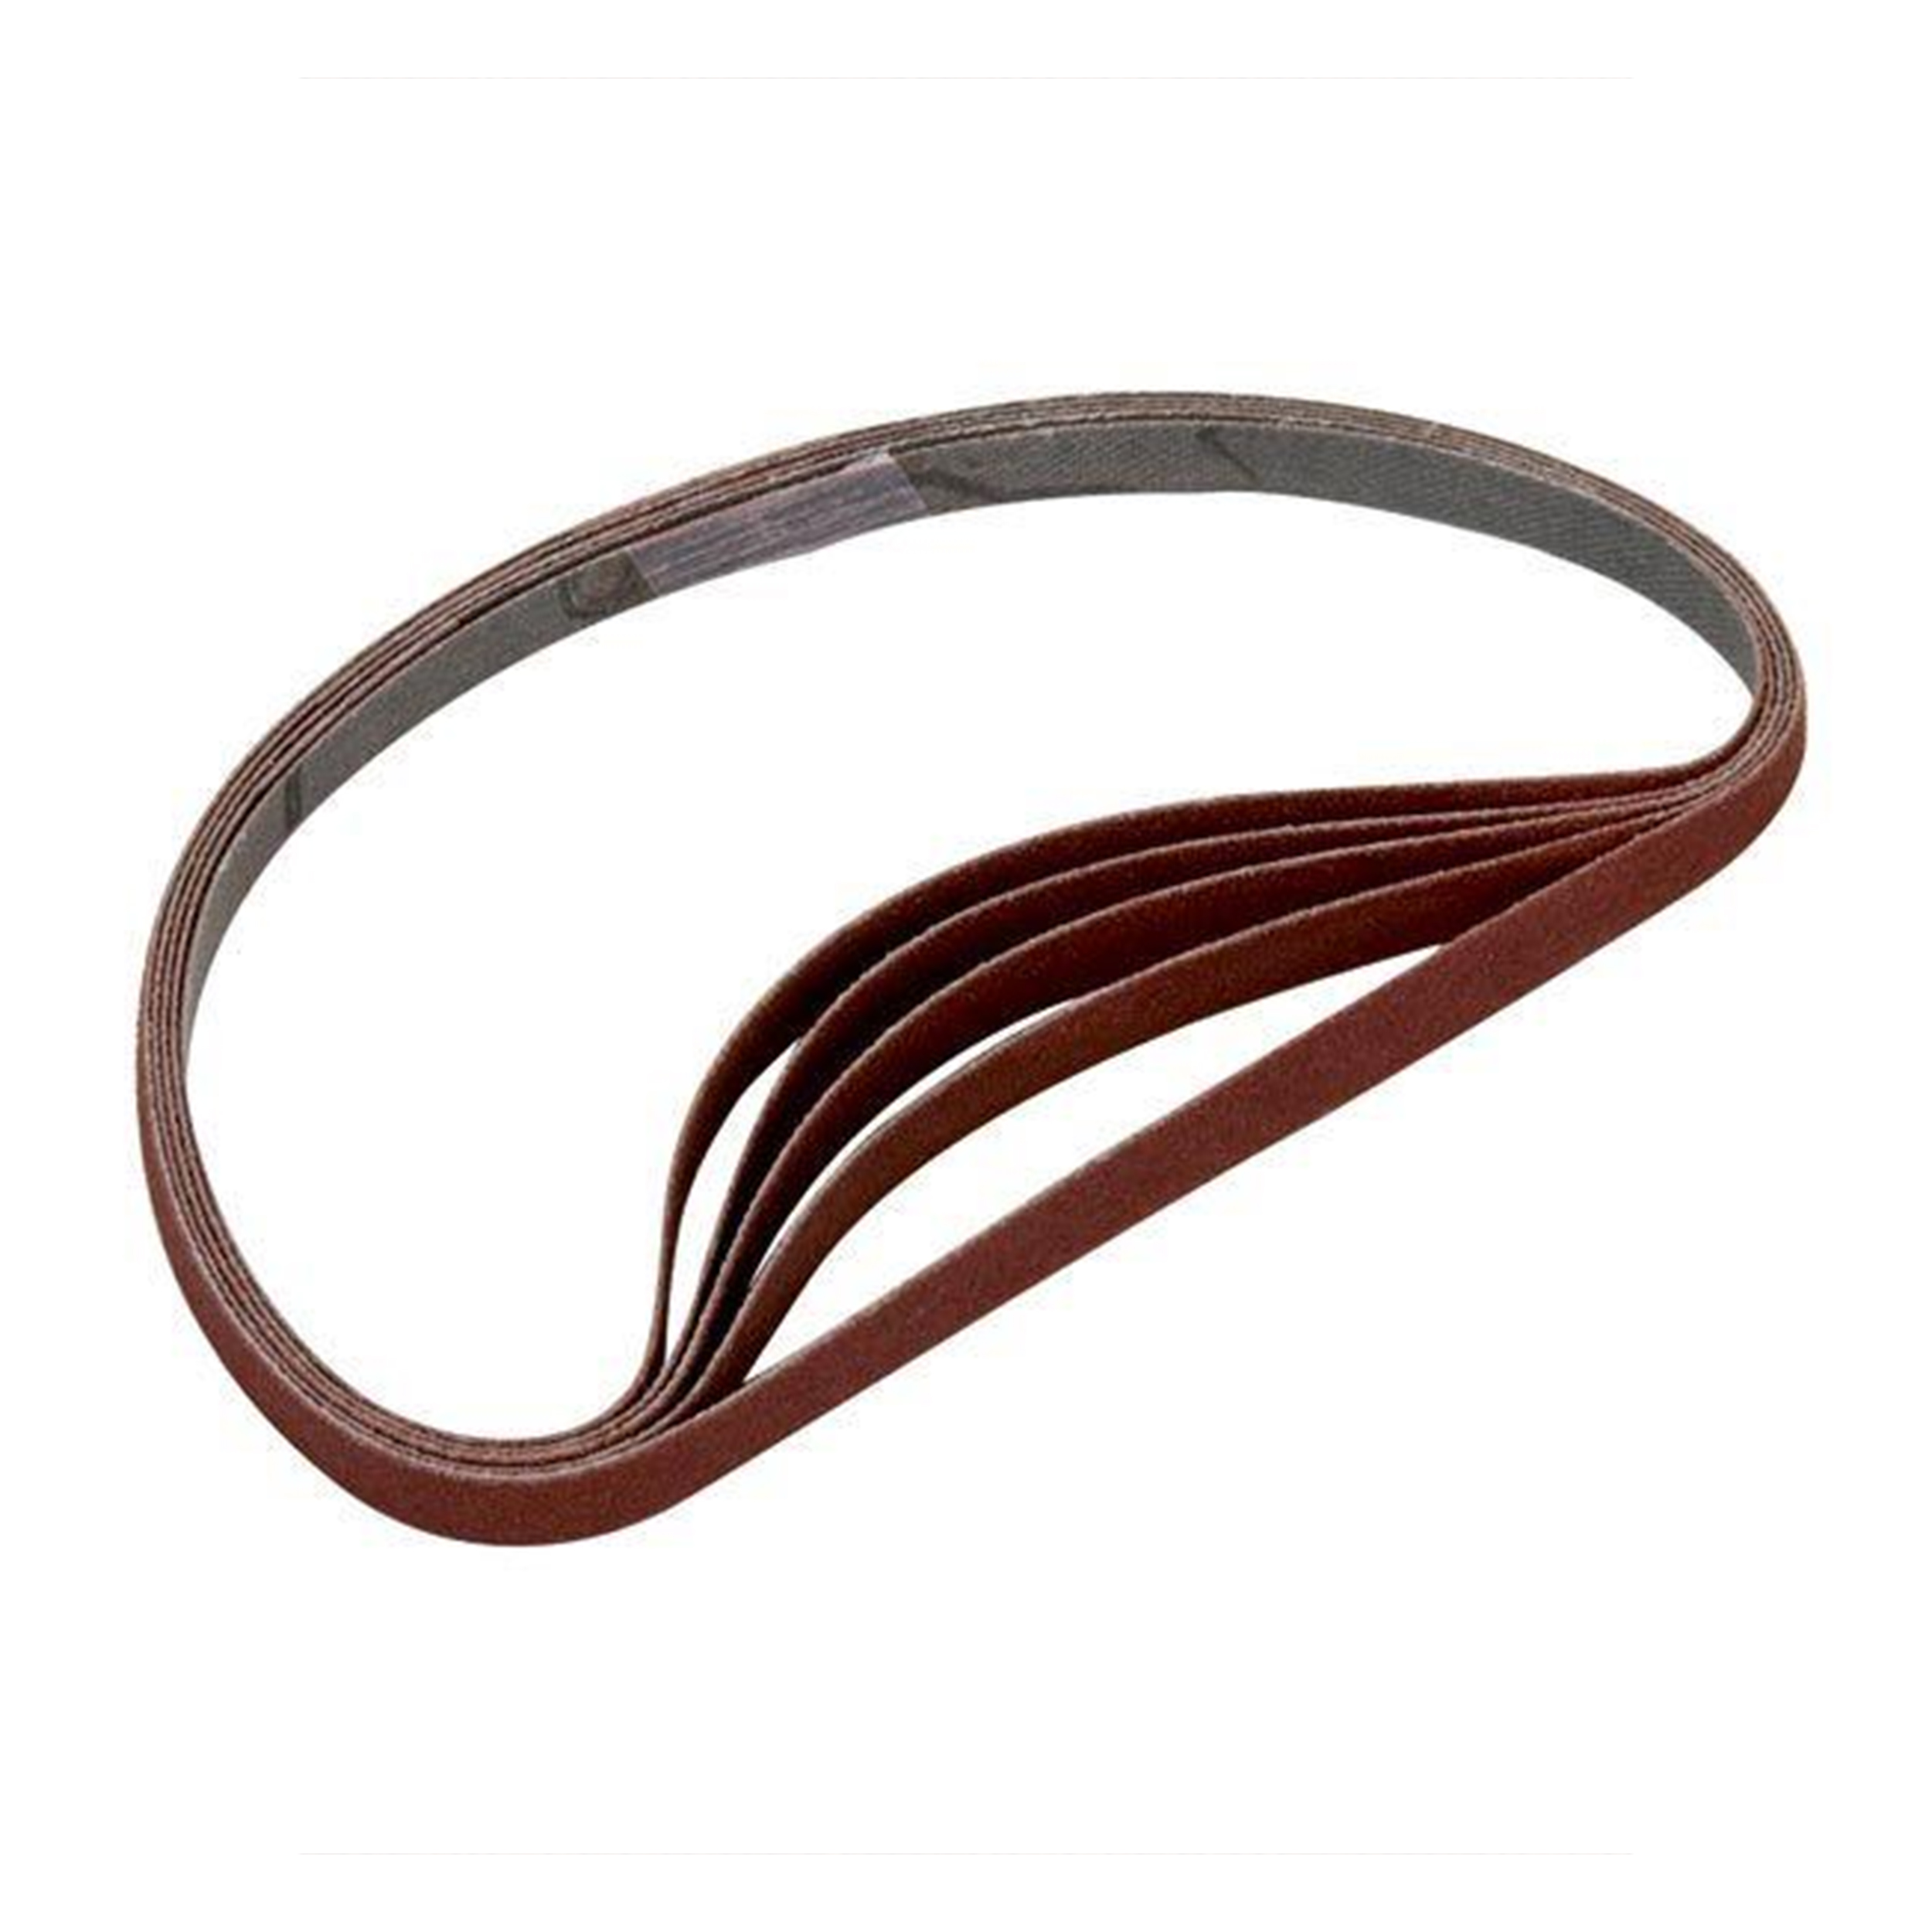 Sanding Stick Replacement Belts, 80 Grit, 5 Pack